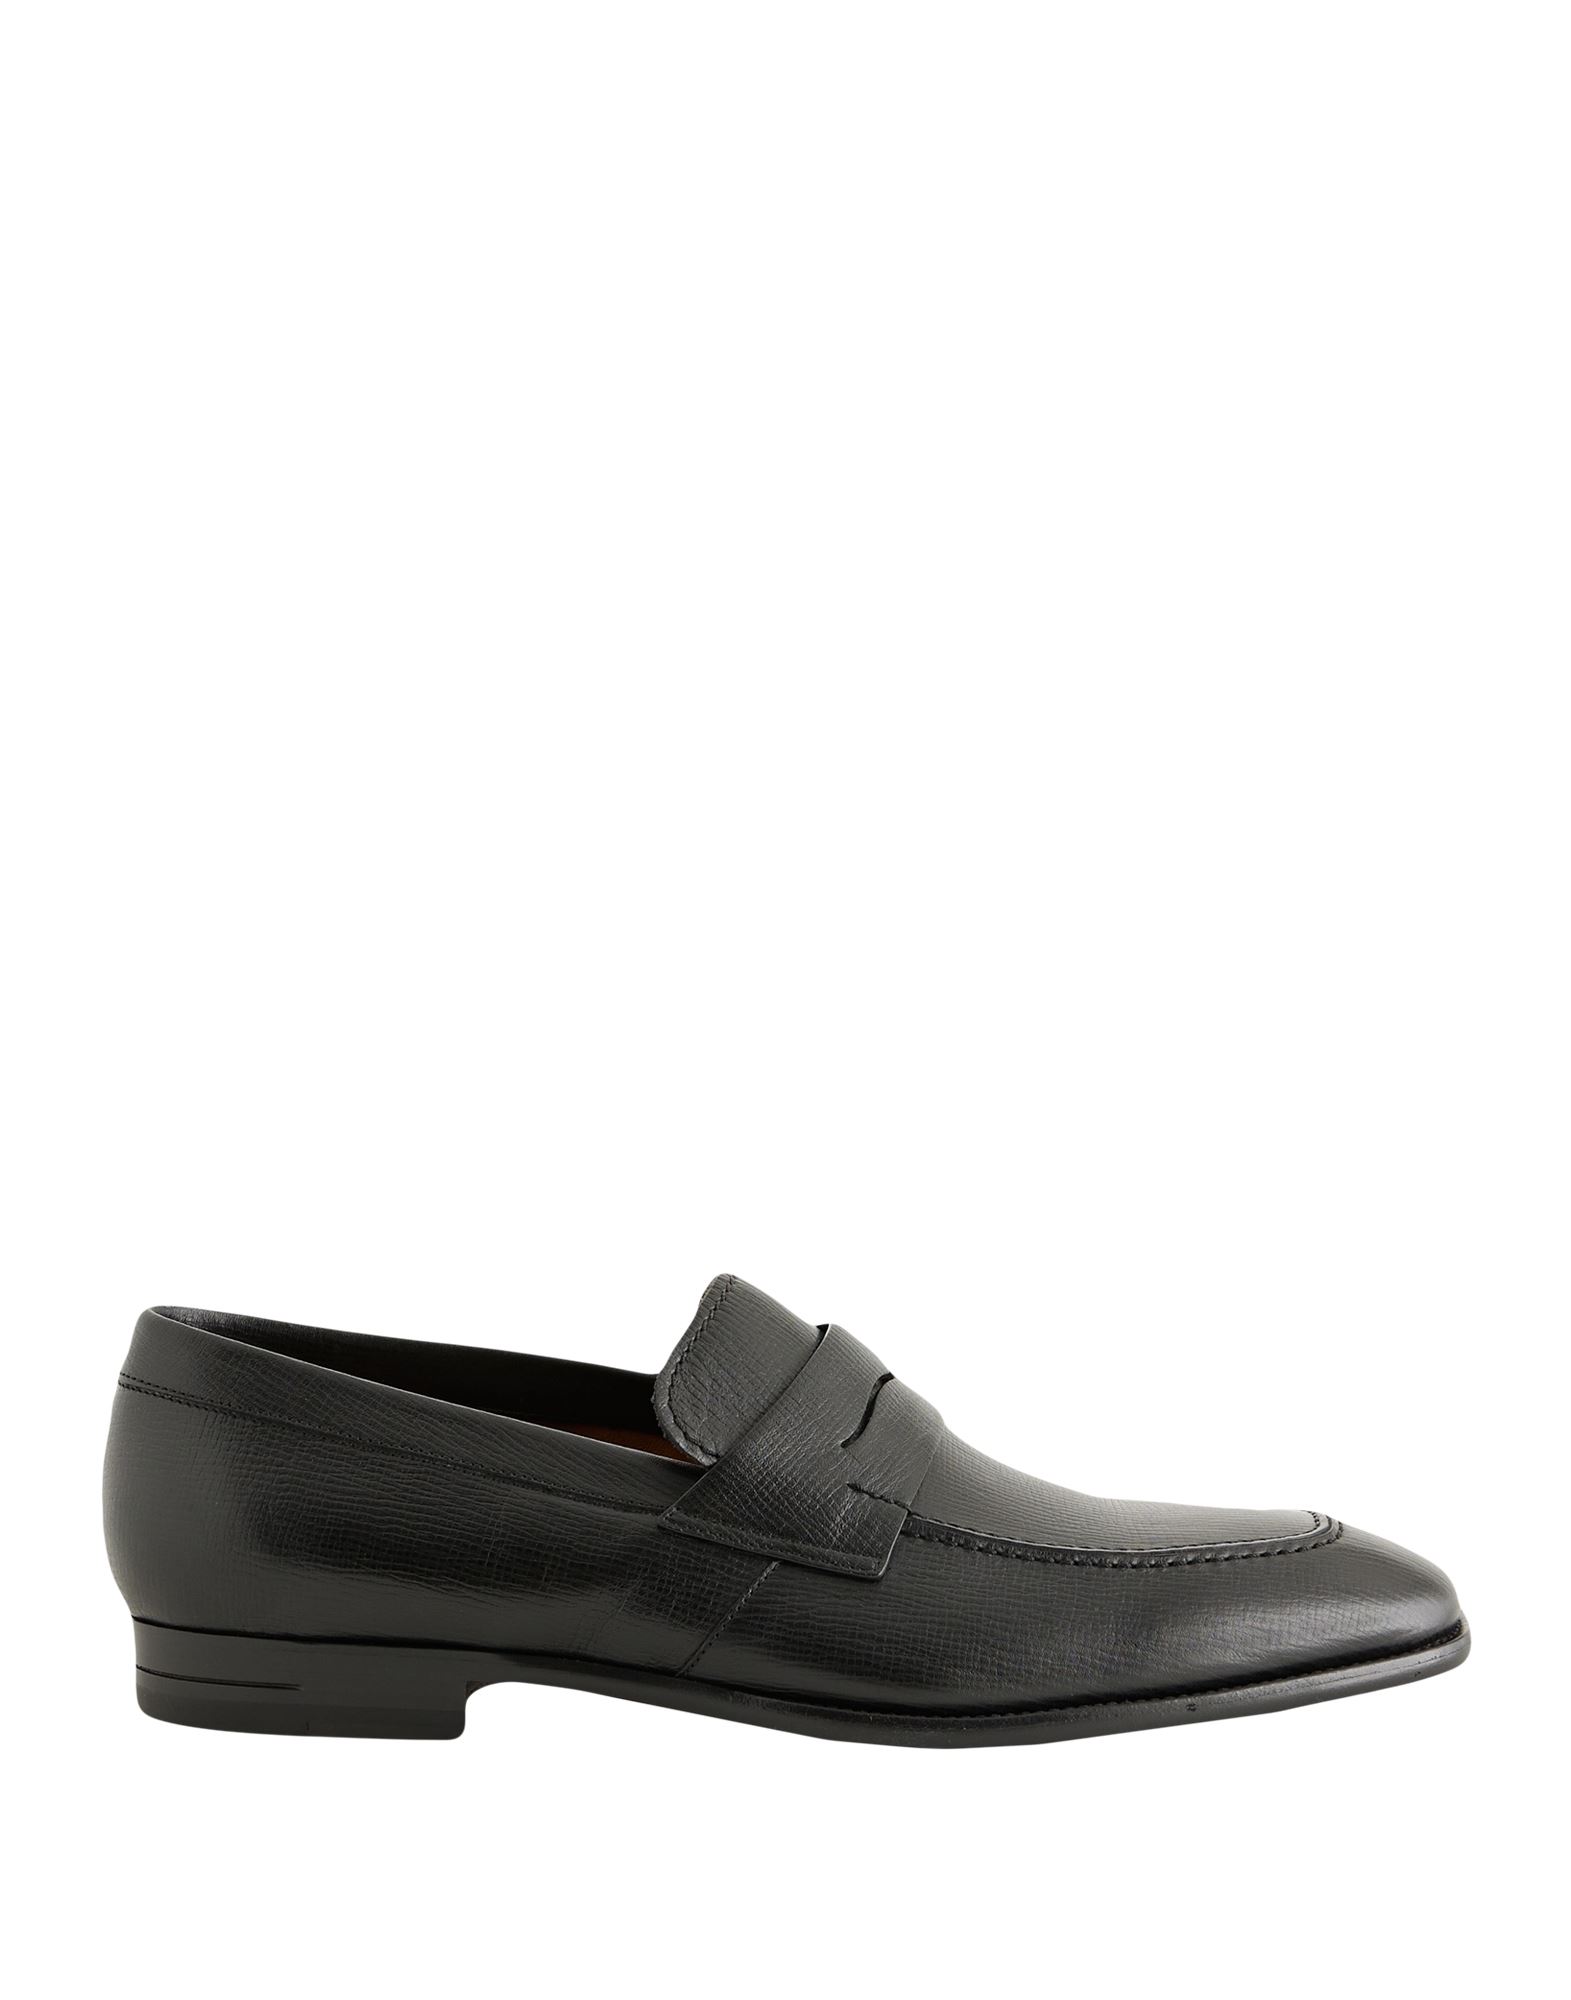 ZEGNA LOAFERS